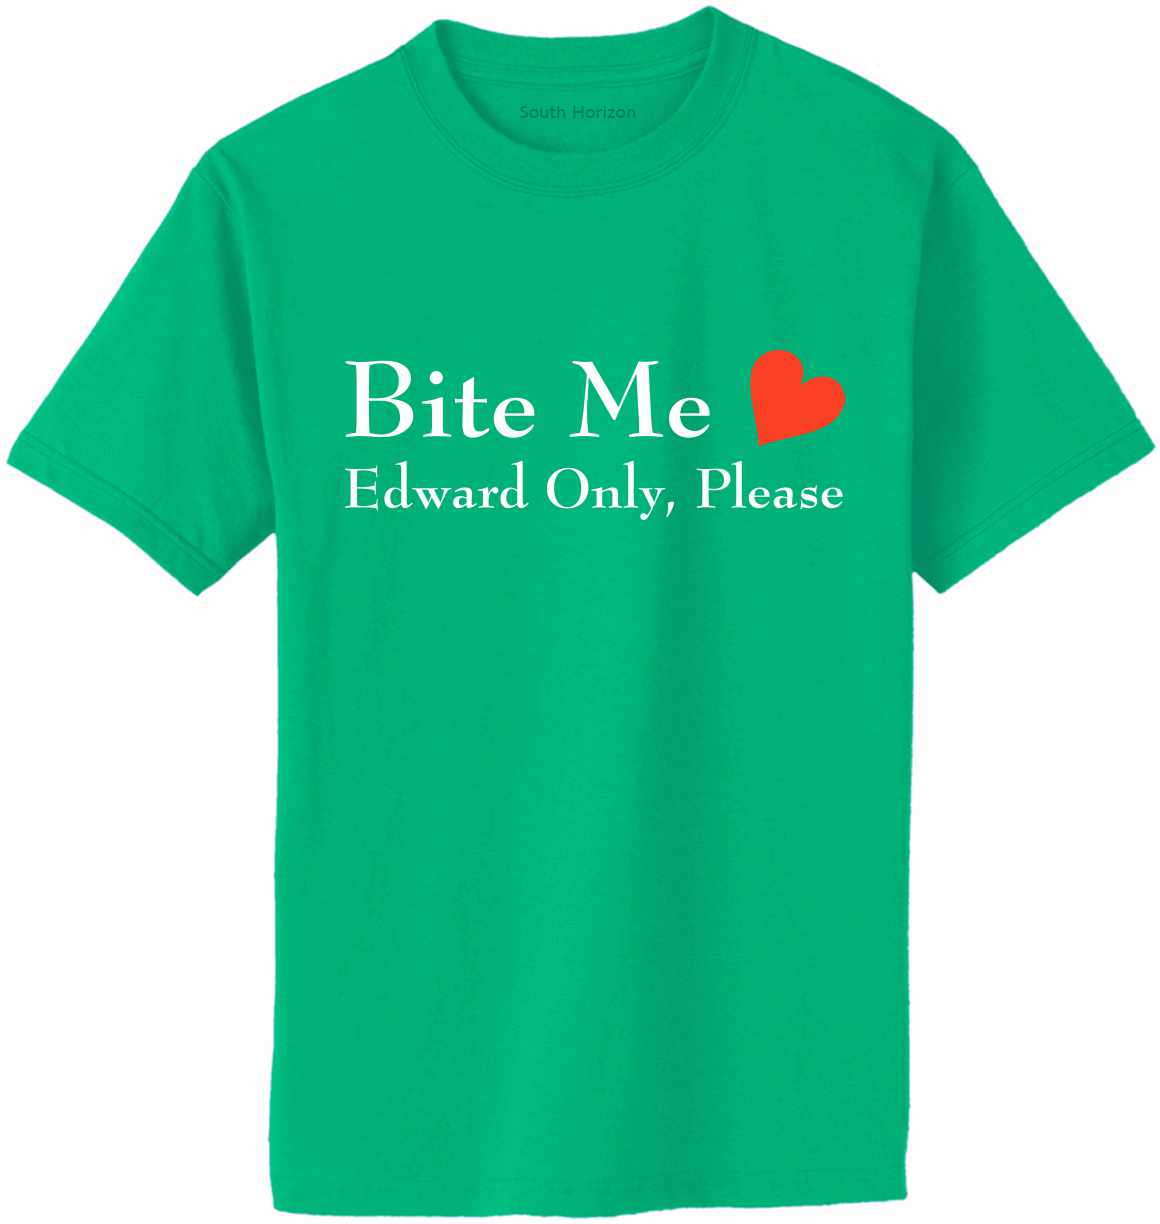 BITE ME, Edward Only Please on Adult T-Shirt (#516-1)